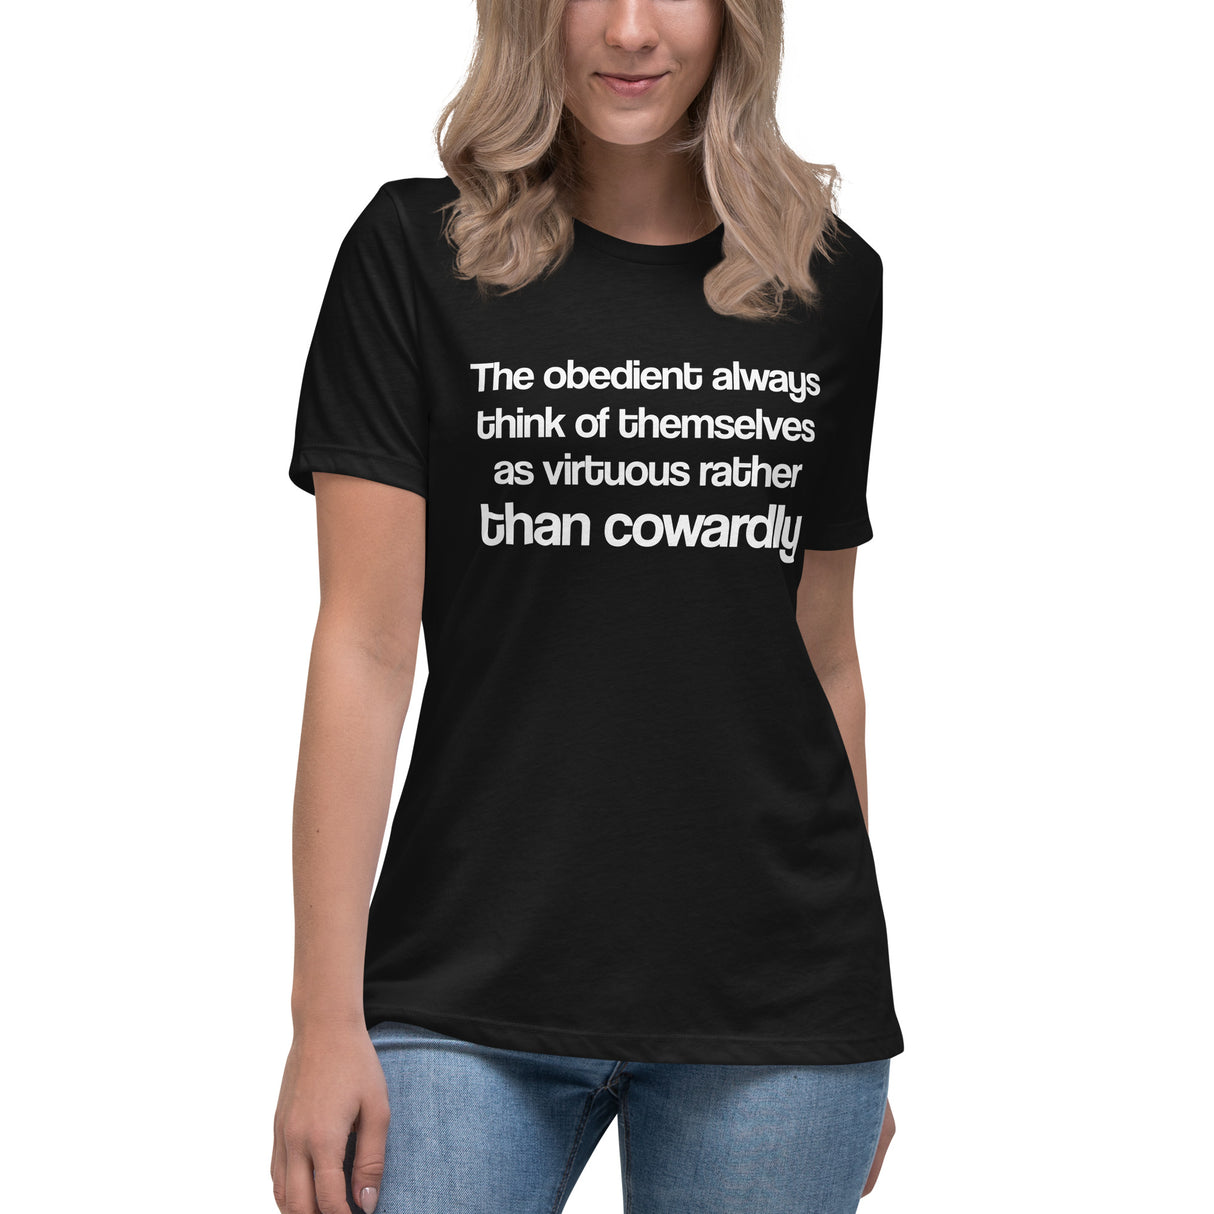 The Obedient Are Cowardly Women's Shirt by Libertarian Country